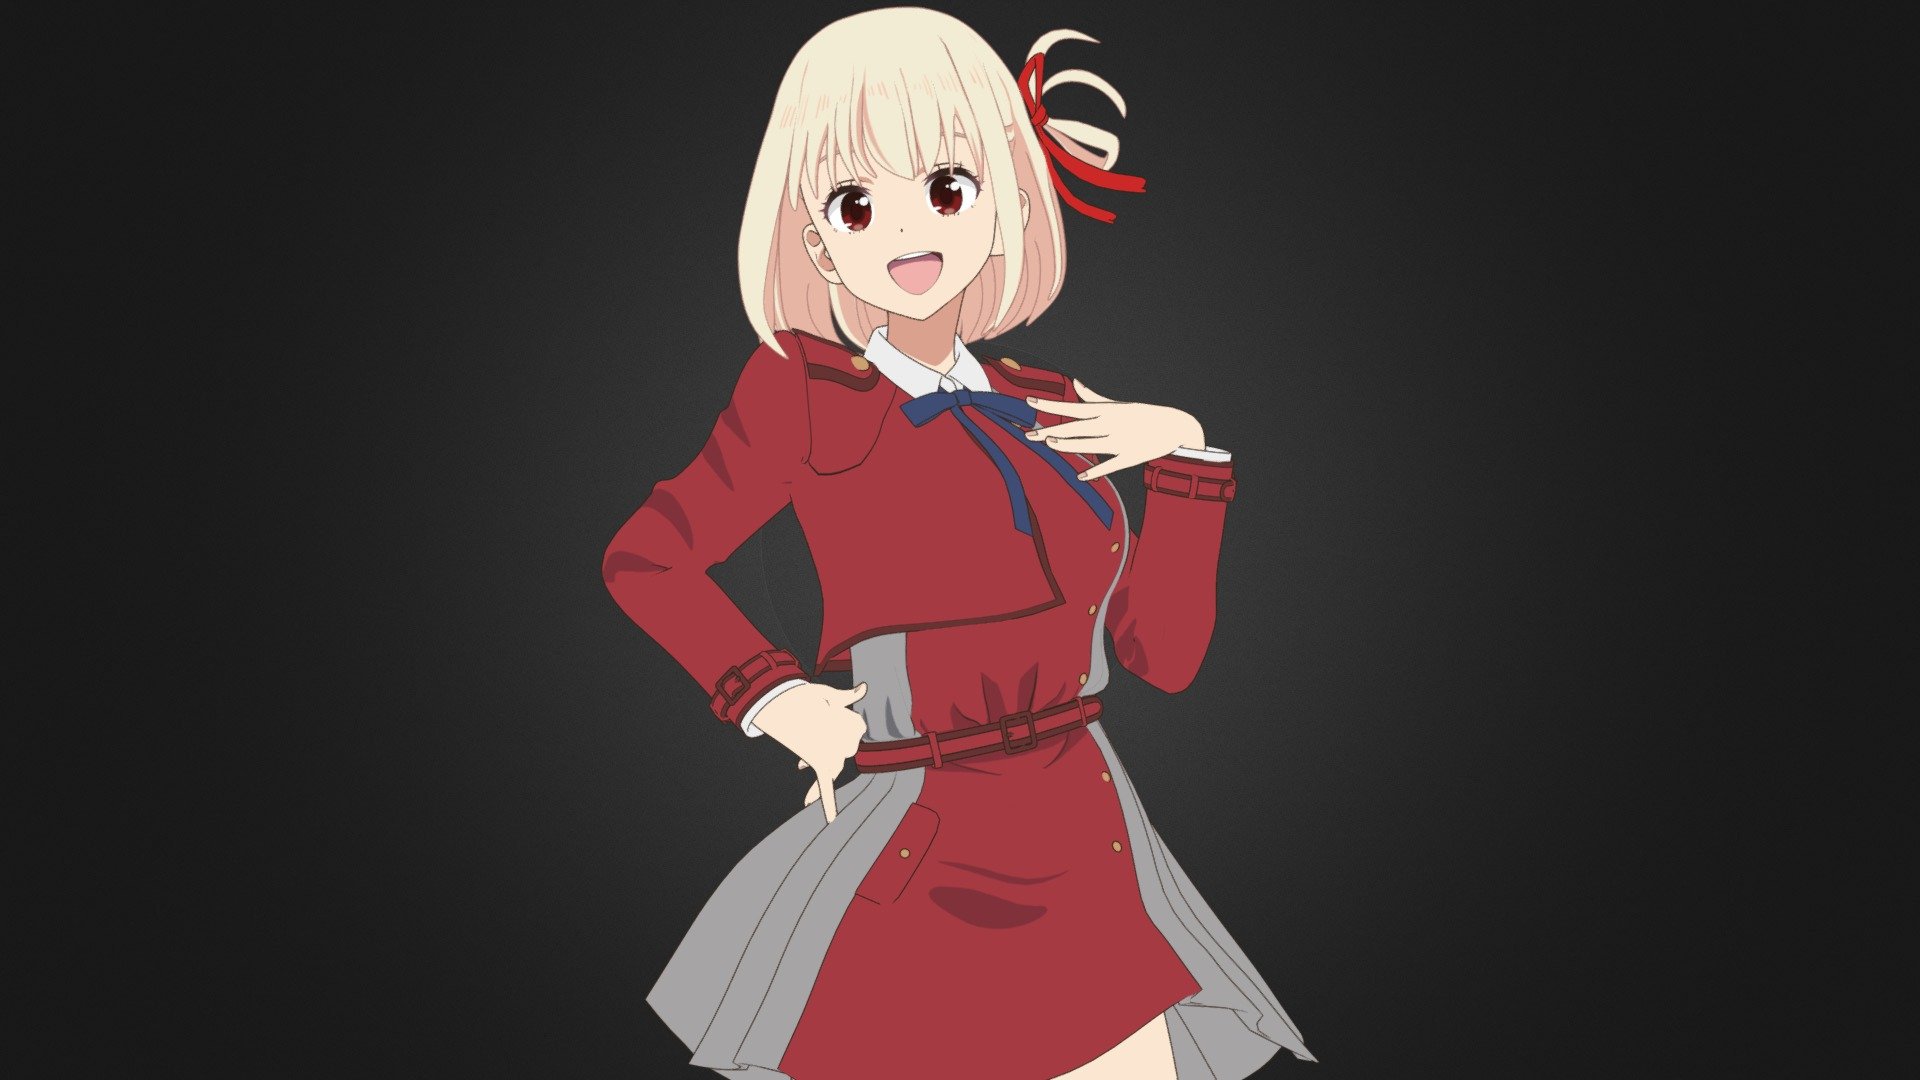 Nishikigi Chisato character from the anime  Lycoris Recoil

3D Model Rigged. In blend format, for Blender v3.3. EEVEE renderer, with nodes, material Toon Shader.

▬▬▬▬▬▬▬▬▬▬▬▬▬▬▬▬▬▬▬▬▬▬▬▬▬▬▬▬▬▬▬▬▬▬▬▬▬▬▬▬▬▬▬▬▬▬

Buy Artstation: https://www.artstation.com/a/23741233

Buy CGTrader: encurtador.com.br/FKMNV

▬▬▬▬▬▬▬▬▬▬▬▬▬▬▬▬▬▬▬▬▬▬▬▬▬▬▬▬▬▬▬▬▬▬▬▬▬▬▬▬▬▬▬▬▬▬

Contents of the .ZIP file:

● Folder with all textures in .tga Format.

● .blend file with the complete 3D Model.

Contents of the .blend file:

● Full body, no deleted parts.

● Individual Hair, separated from the body.

● Pieces of Clothing, separated from the body. (Individuals, Can be removed)

● Complete RIG, with all bones for movement. (Metarig Rigify Armature)

● Materials configured with nodes.

● UV mapping.

● Textures embedded in the .blend file.

● Modifiers. (Subdivide, Solidify and Outline for contours) - Nishikigi Chisato - Lycoris Recoil - 3D model by Gilson.Animes 3d model